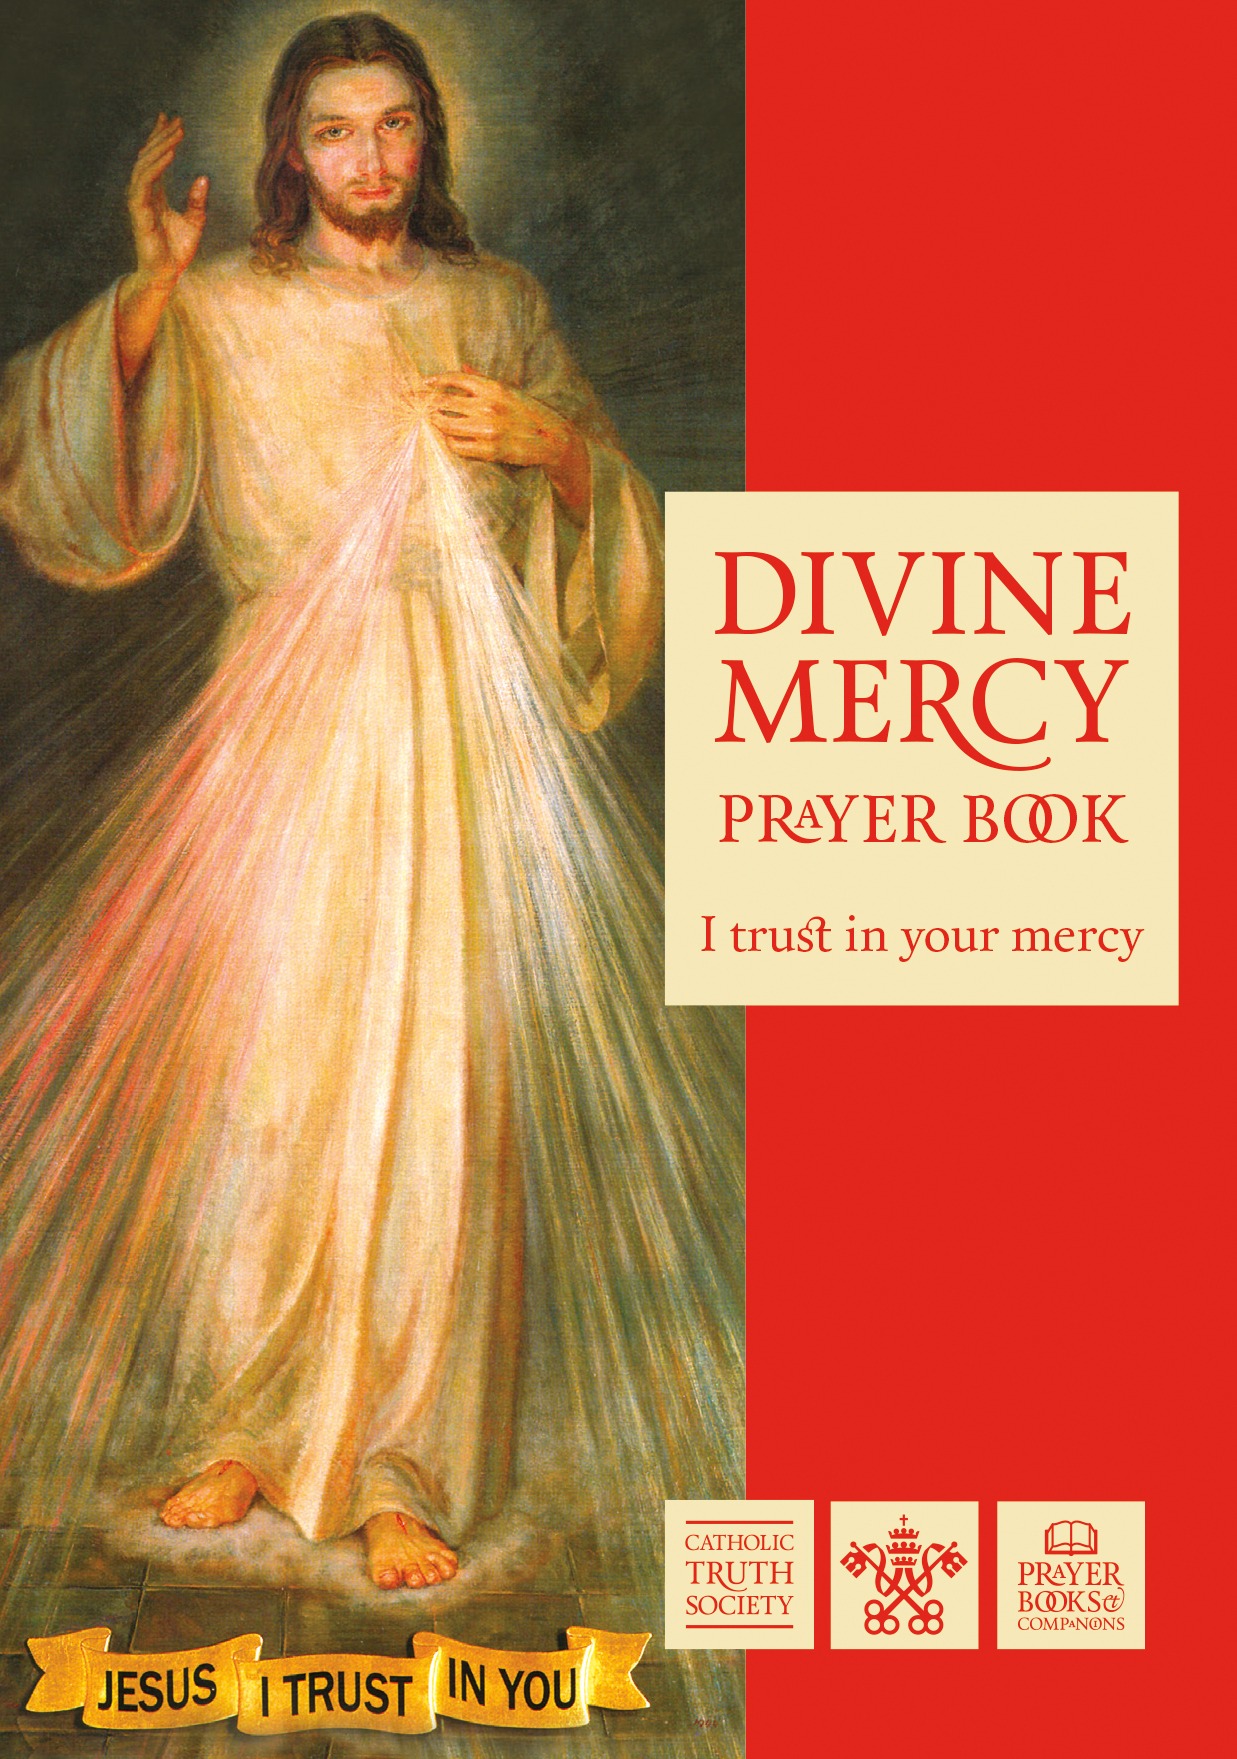 The Book of Truth: Volume one: The by Maria Divine Mercy